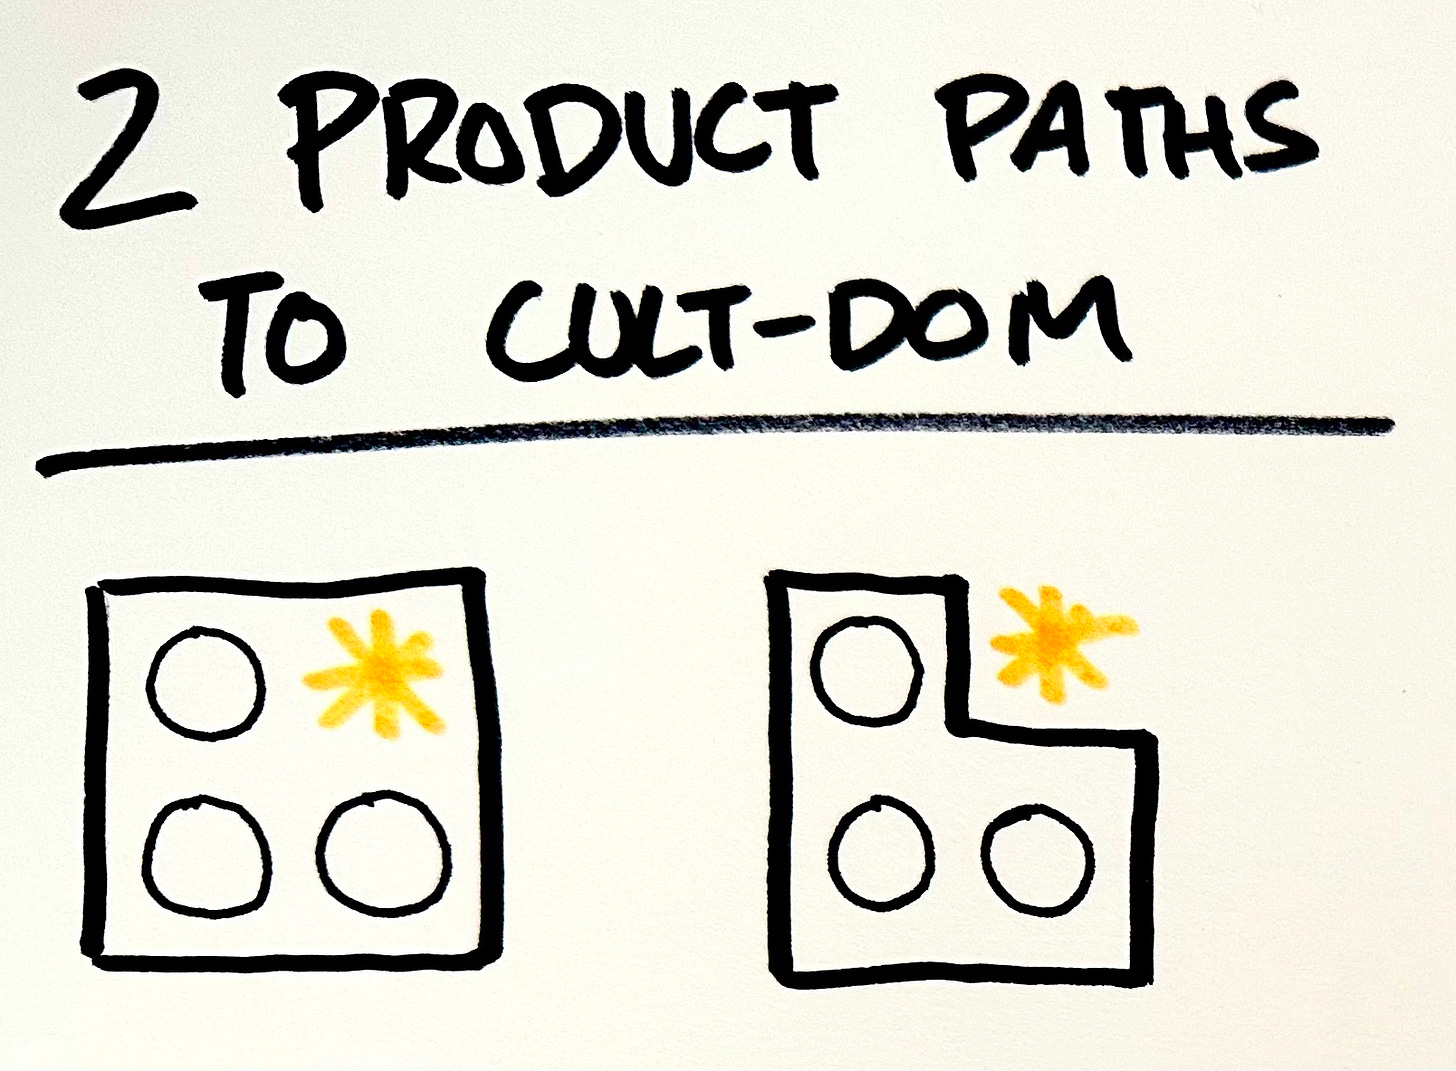 a hand drawn graphic with the title 2 product paths to cult-dom. Underneath the title are 2 boxes. On the left is a square with an orange asterisk in the top right corner and 3 black circles in the other 3 corners. On the right is the same layout of asterisk and circles but the box is drawn in an l-shape around the circles leaving the asterisk outside its borders.